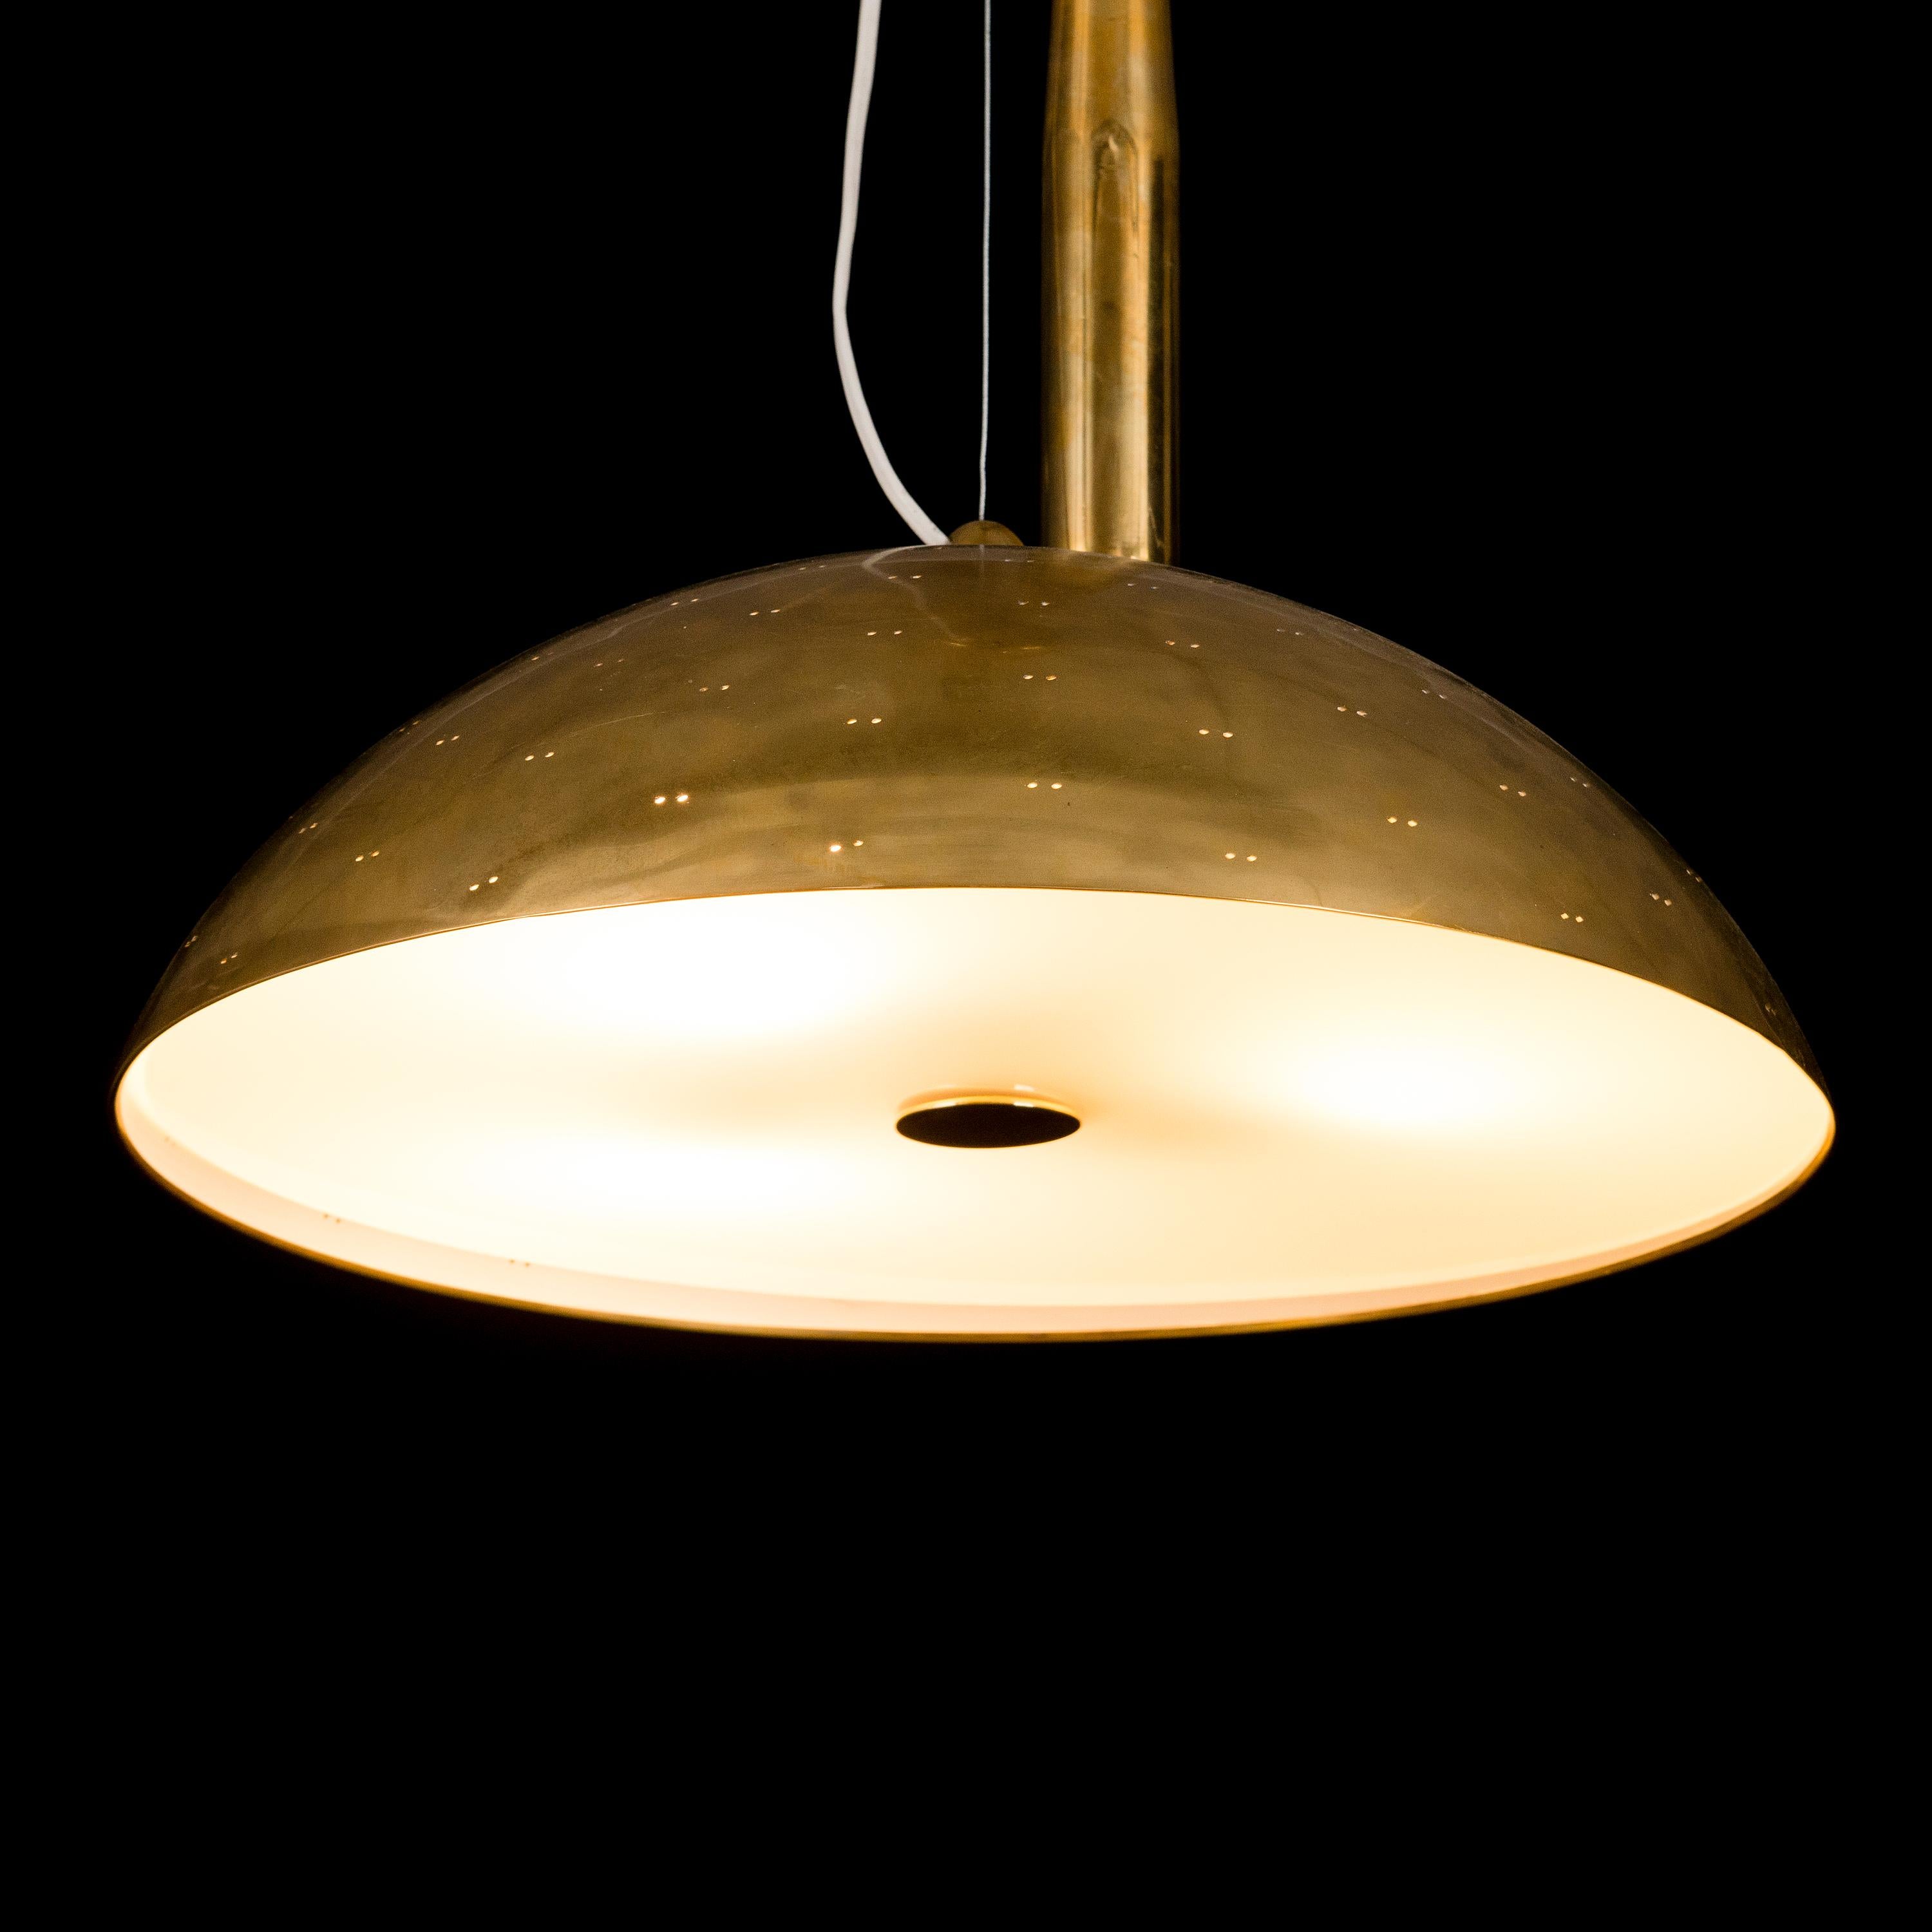 20th Century Paavo Tynell Bras Pendant Light Mod 1965 with Adjustable Counterweight For Sale